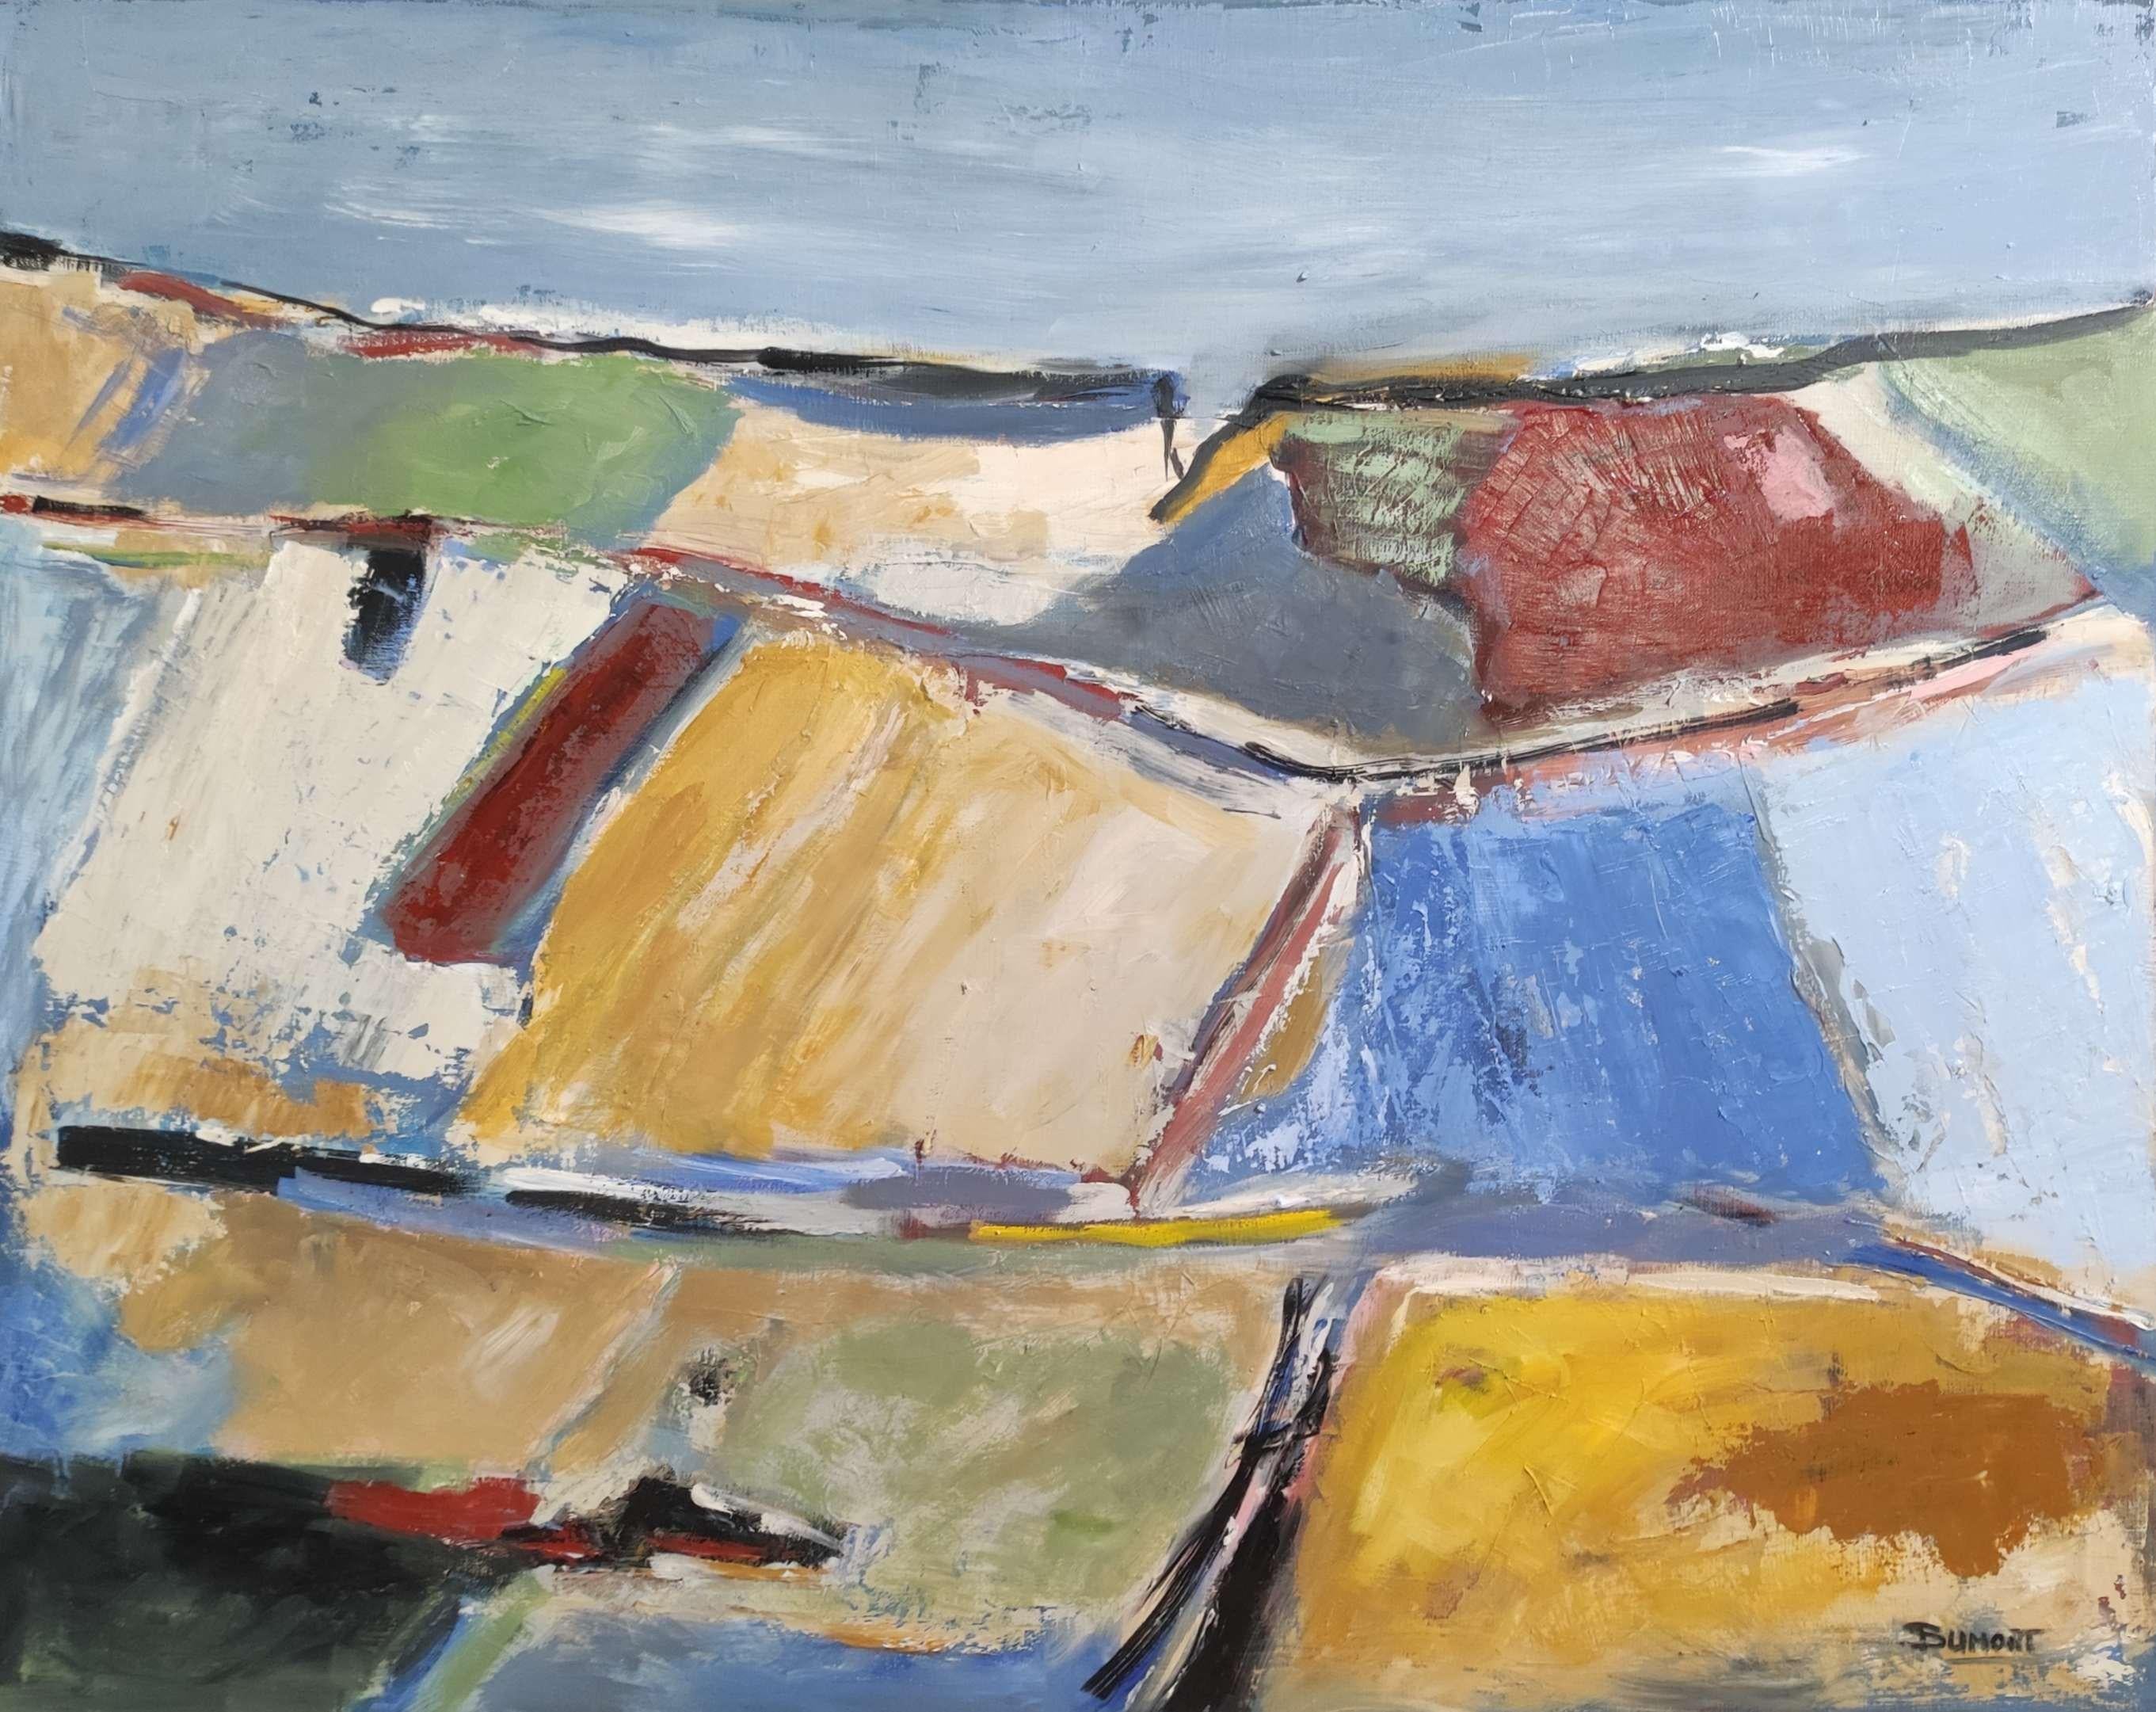 fields 8, countryside landscape, blue, yellow, abstract, expressionism, oil - Abstract Expressionist Painting by SOPHIE DUMONT